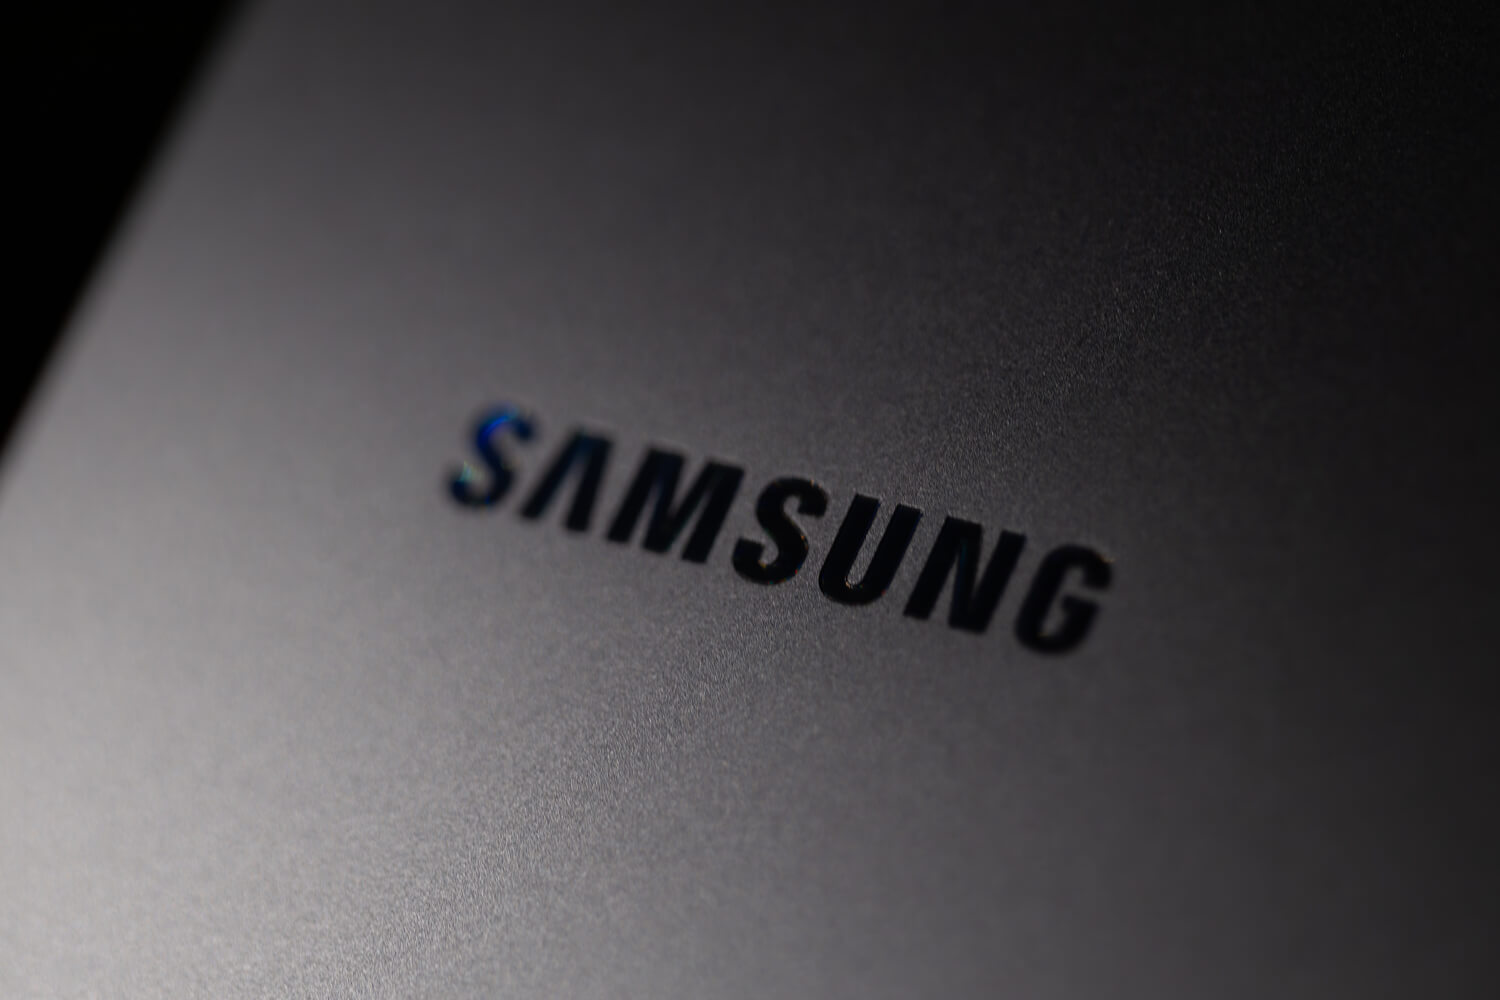 Samsung GB4 Photograph of logo on the laptop